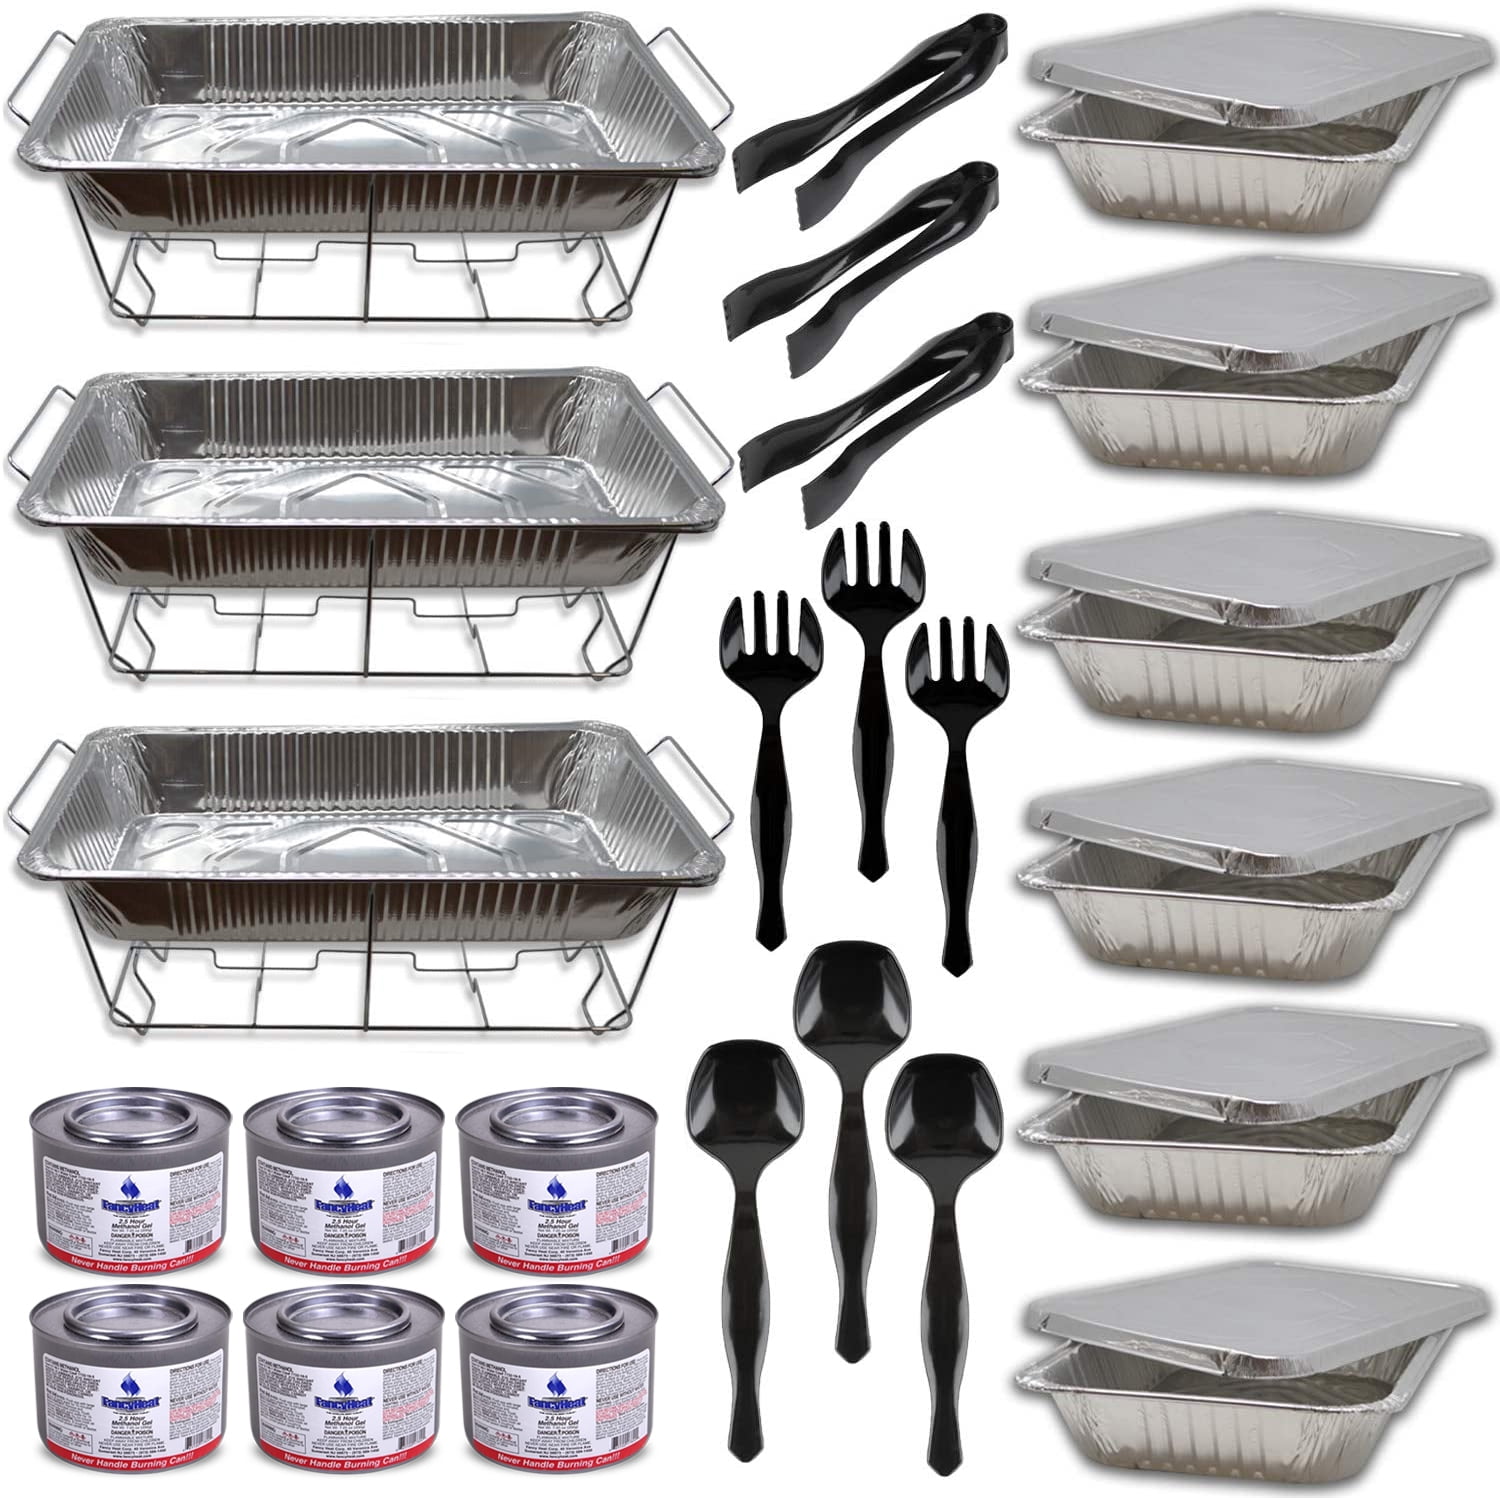 Disposable Chafing Dish Buffet Set, Food Warmers for Parties, 30 Pcs Buffet  Servers and Warmers, Catering Supplies, Pans (9x13), Warming Trays for  Food, With Covers, Utensils, Lids & Sterno Fuel Cans 